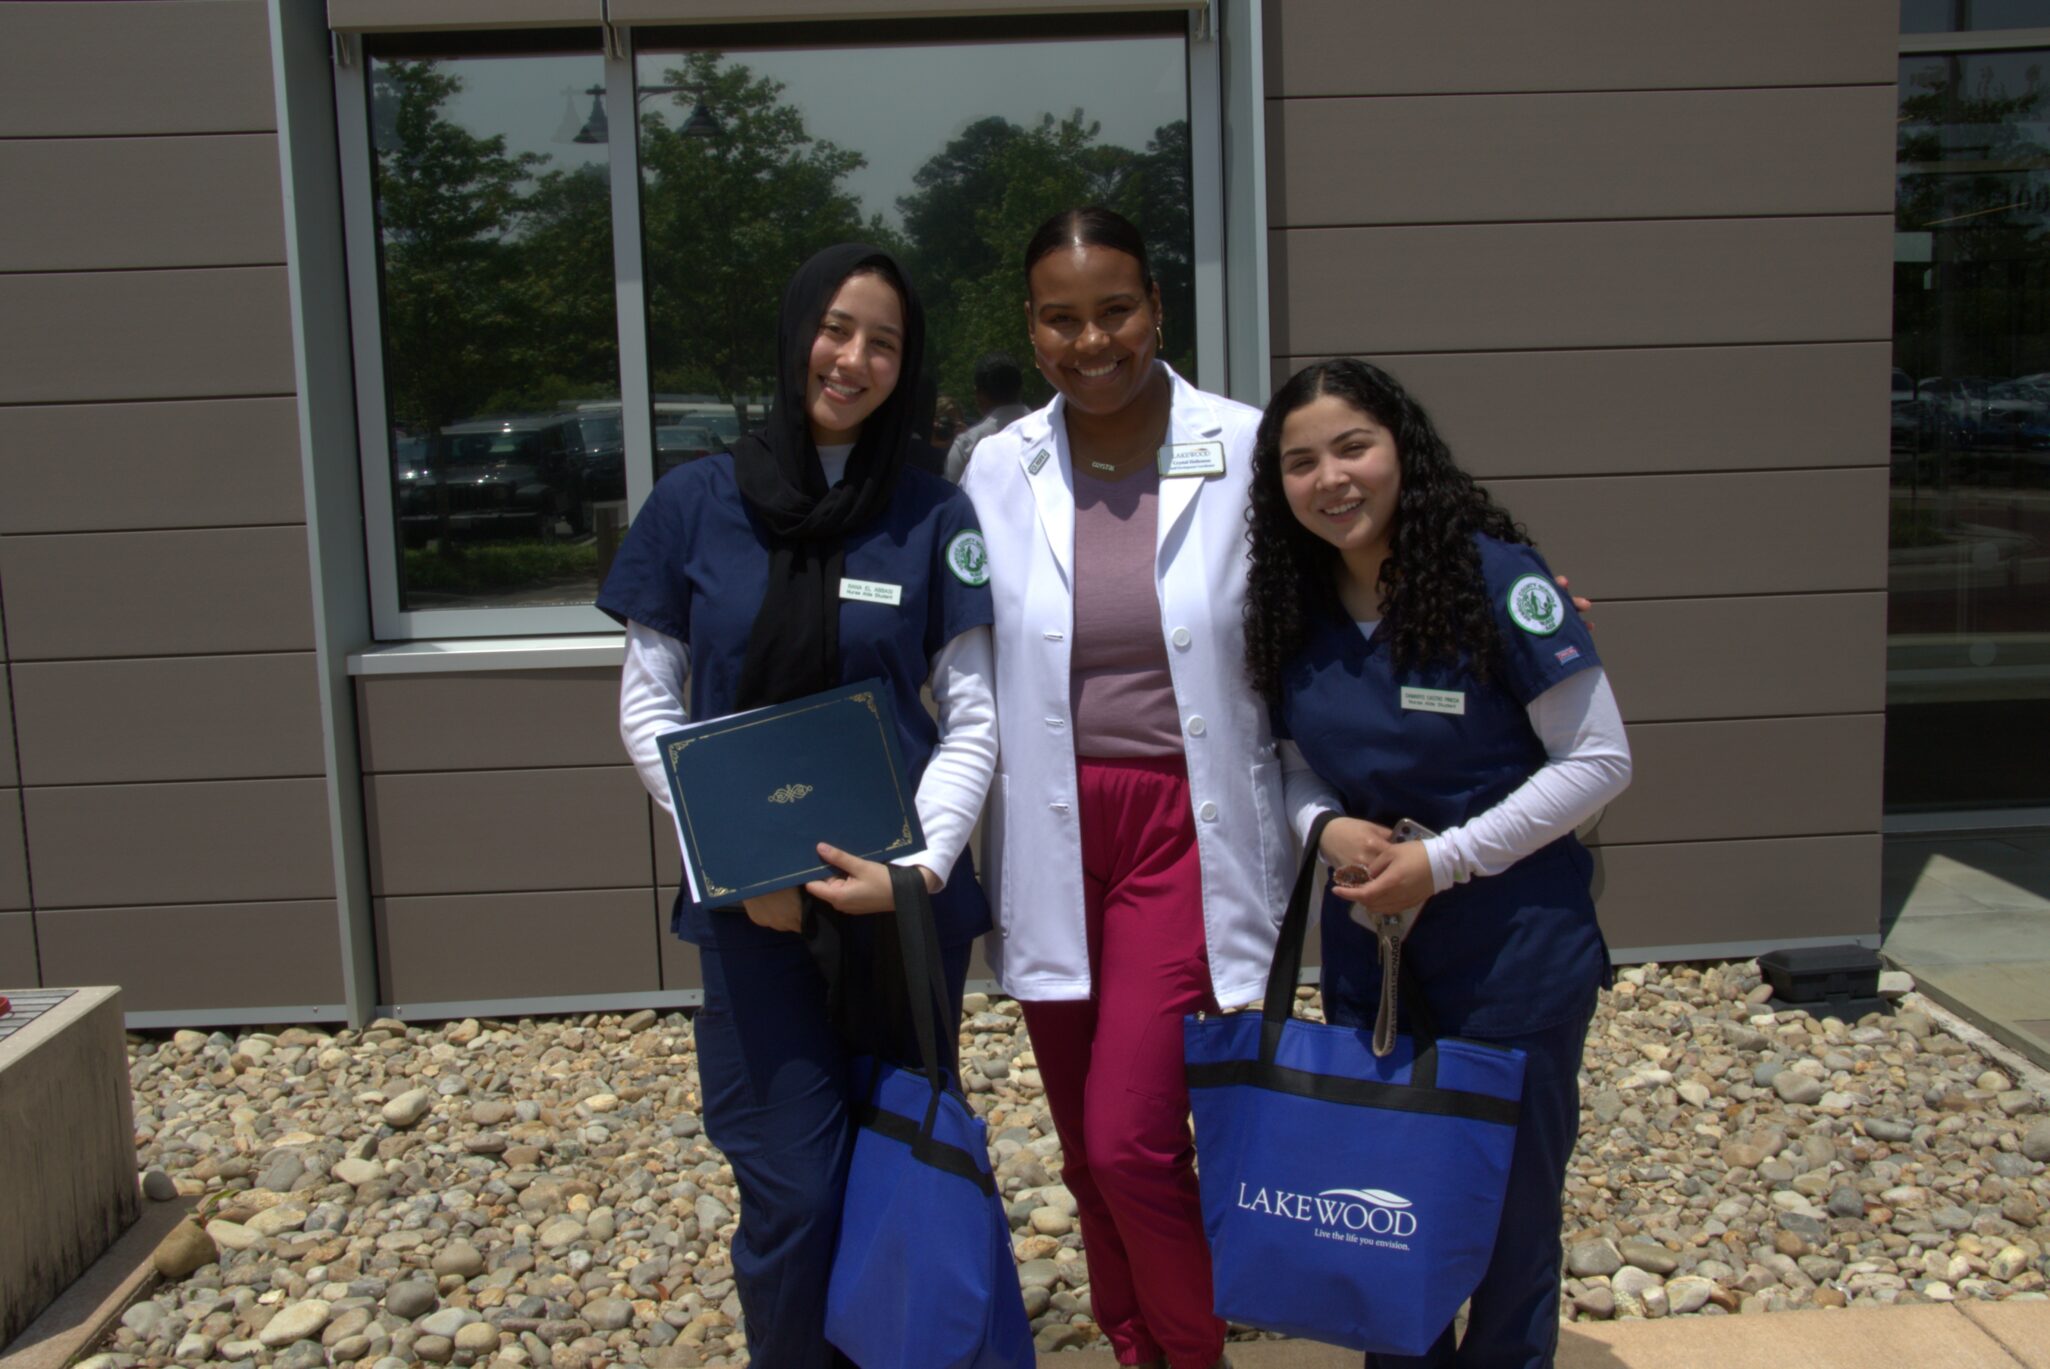 The Lakewood team is thrilled to announce 21 newly hired Certified Nursing Assistants (CNAs) through a partnership with Henrico Career and Technical Education (CTE). Three of the nurses pose for a photo.